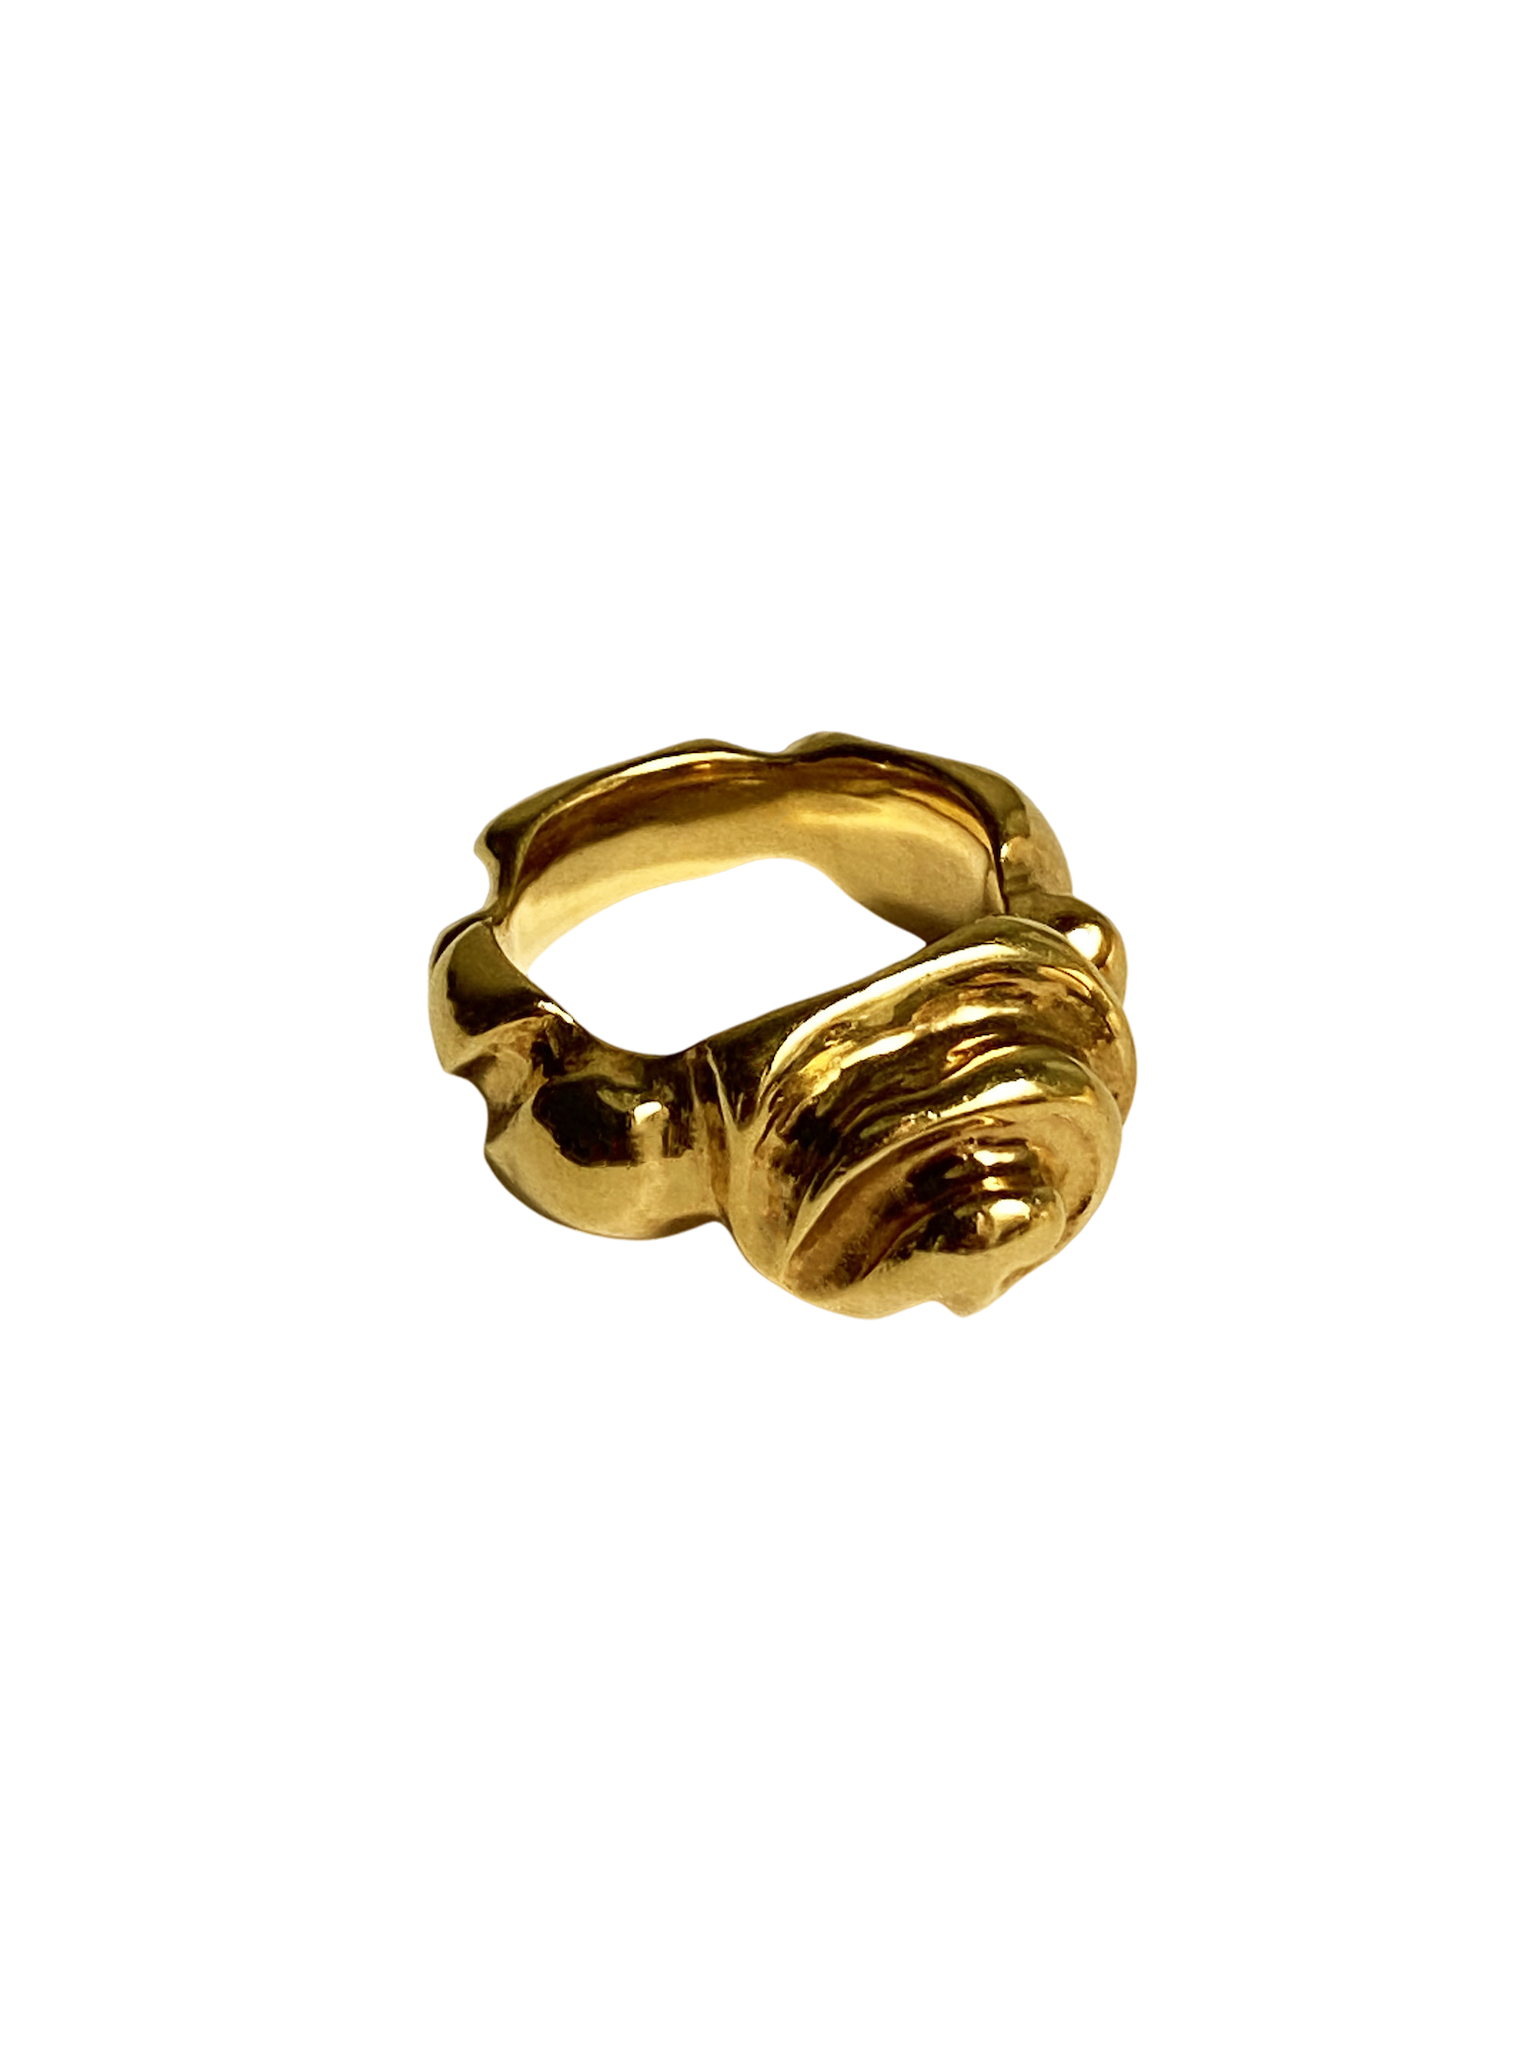 The wave fouetté ring